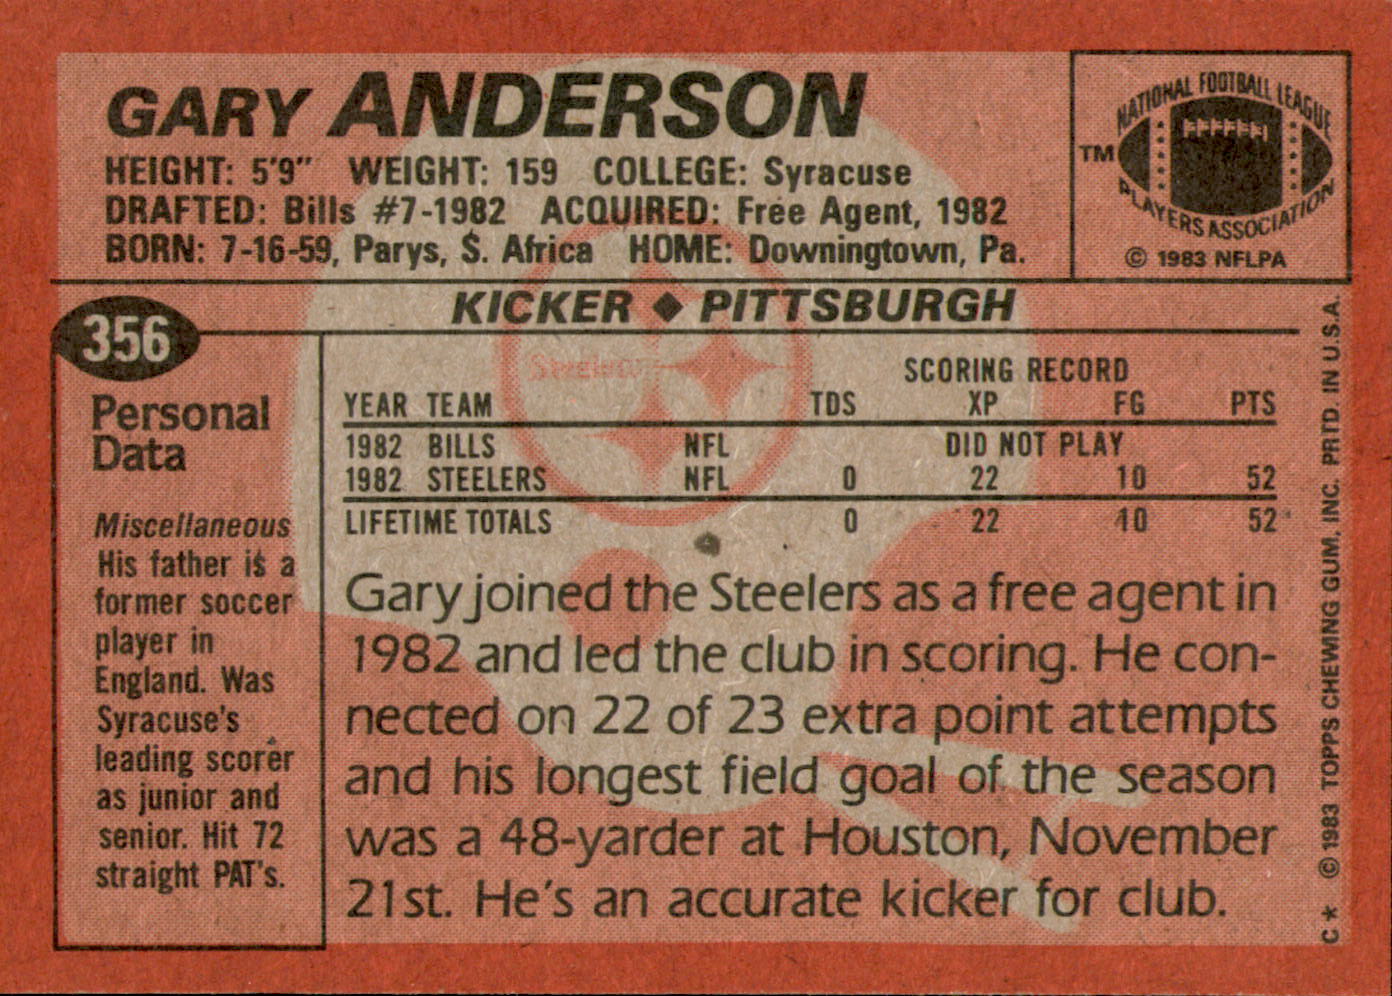 1983 Topps #356 Gary Anderson DP RC back image